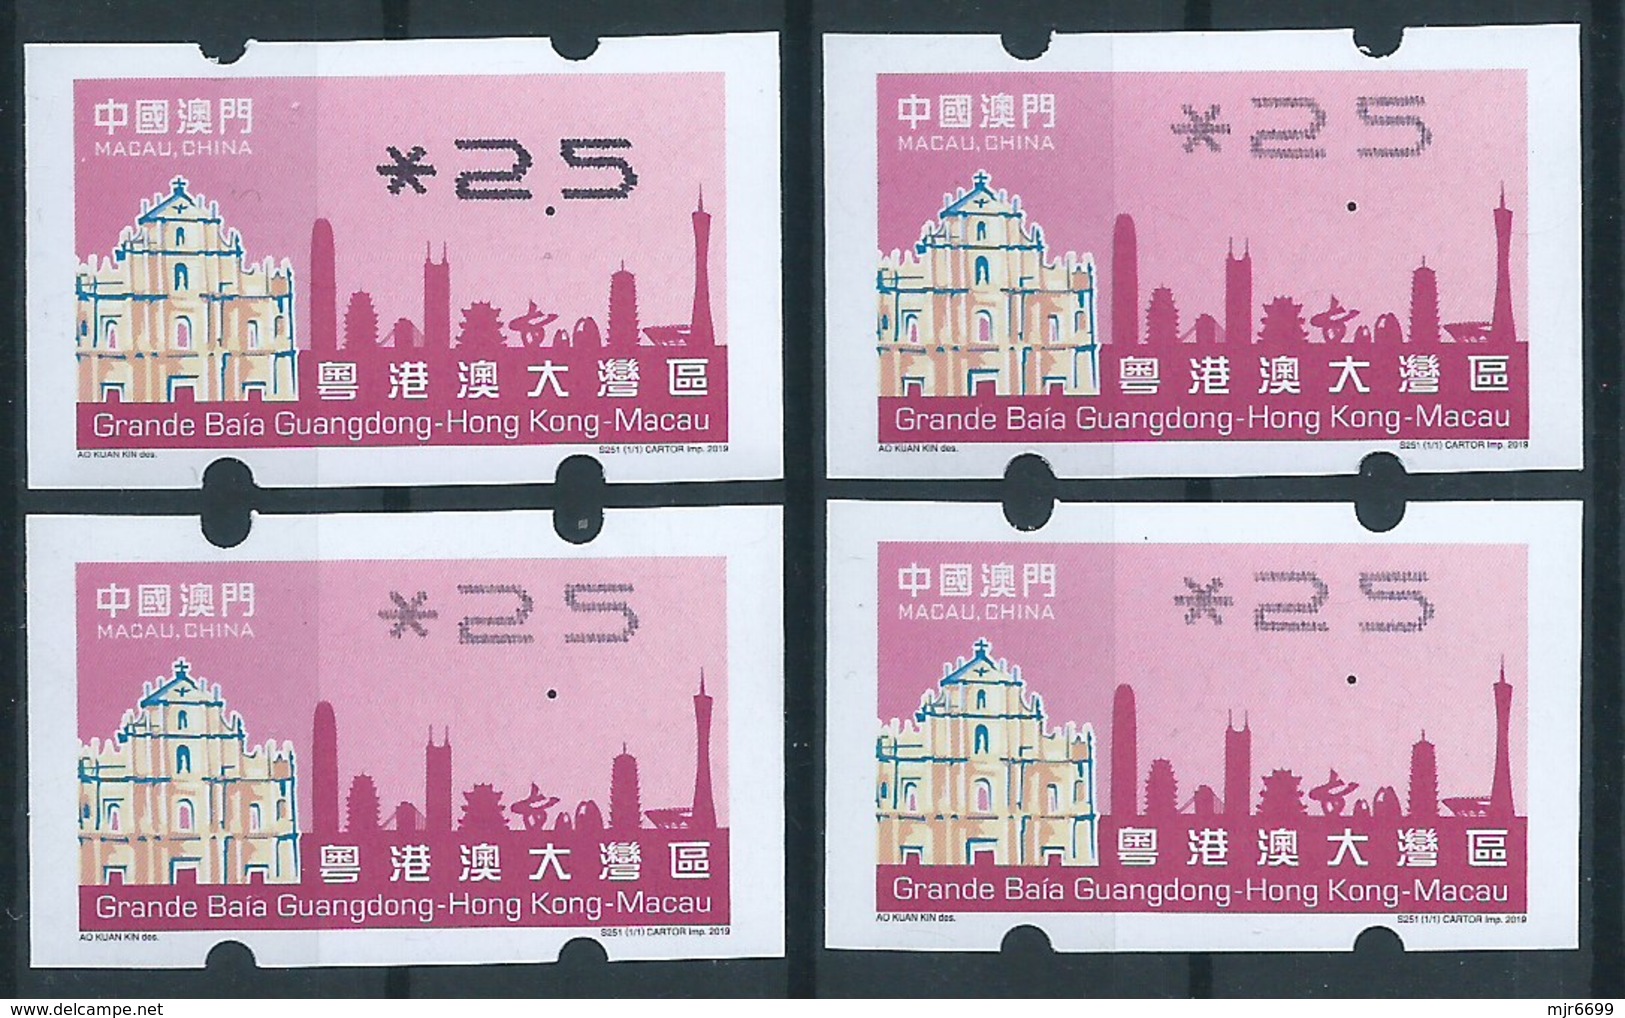 MACAU 2019 GUANDGONG, H.K. & MACAU GREAT BAY ATM LABELS 2.50PATACAS SHIFTED UP PRINT LOT OF 3, NORMAL FOR COMPARE - Automaten